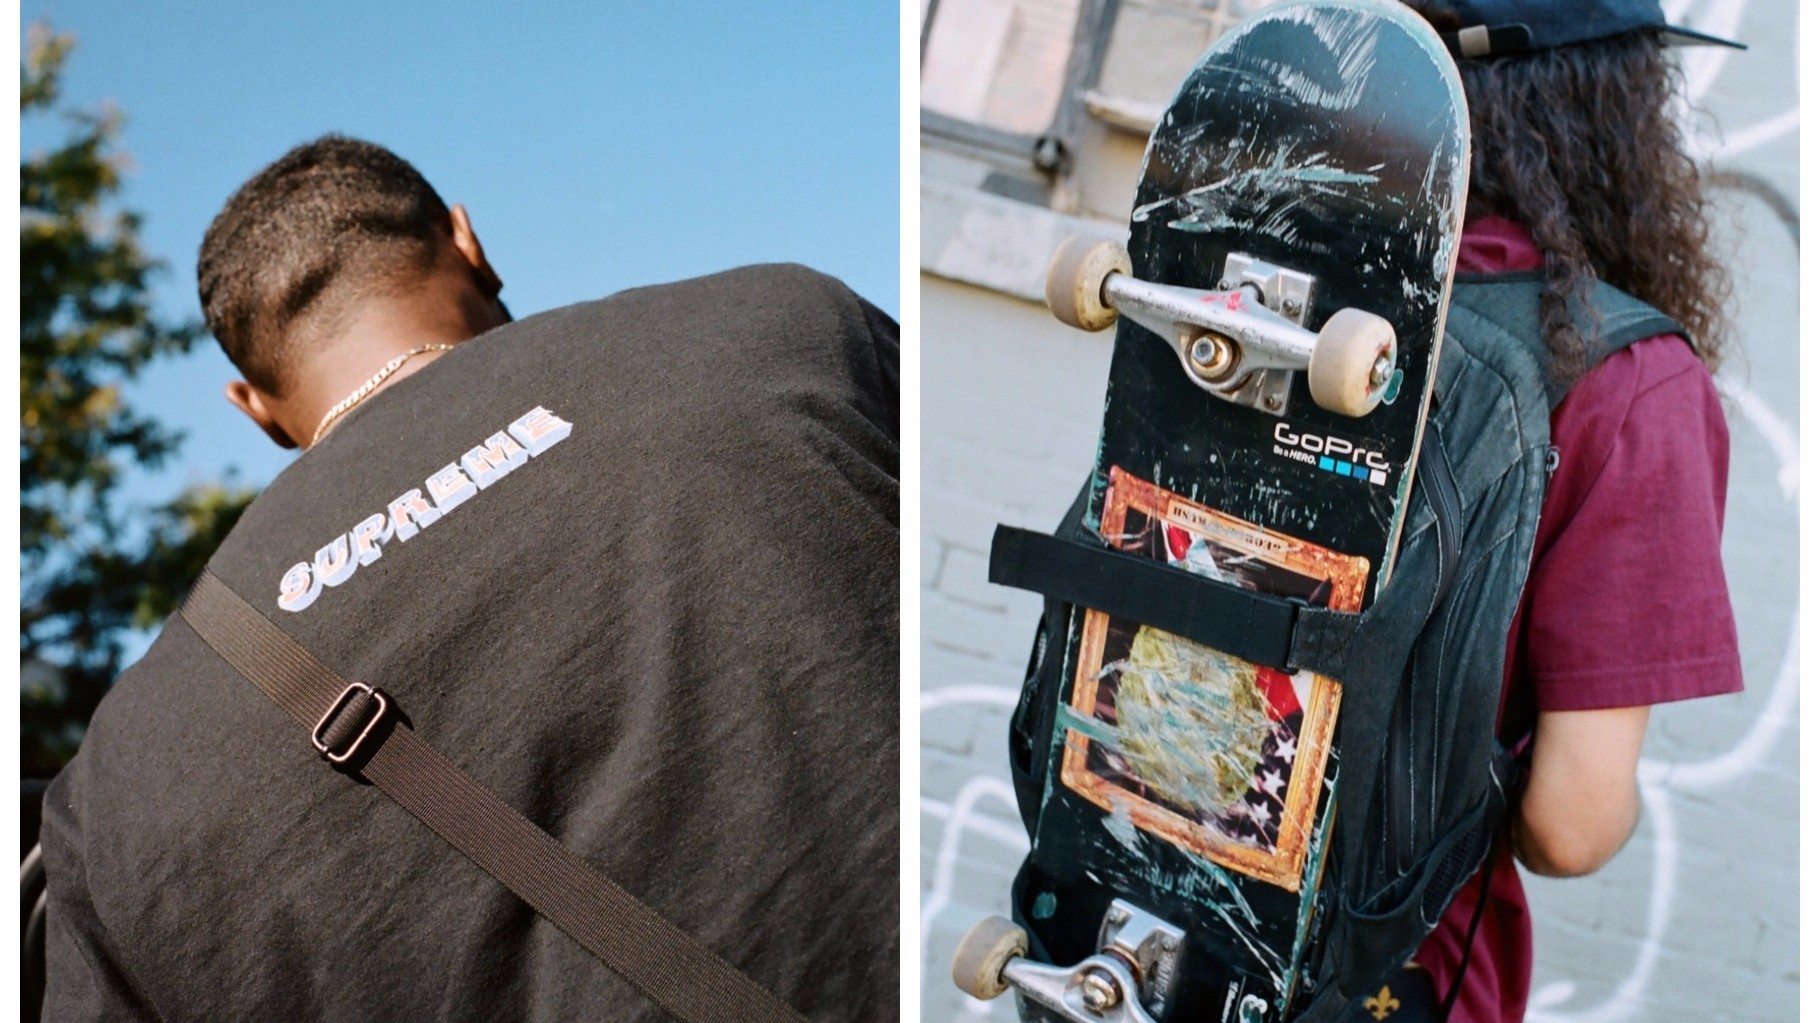 herfst Compliment Ondergedompeld supreme comes to brooklyn, we photograph the best fan looks